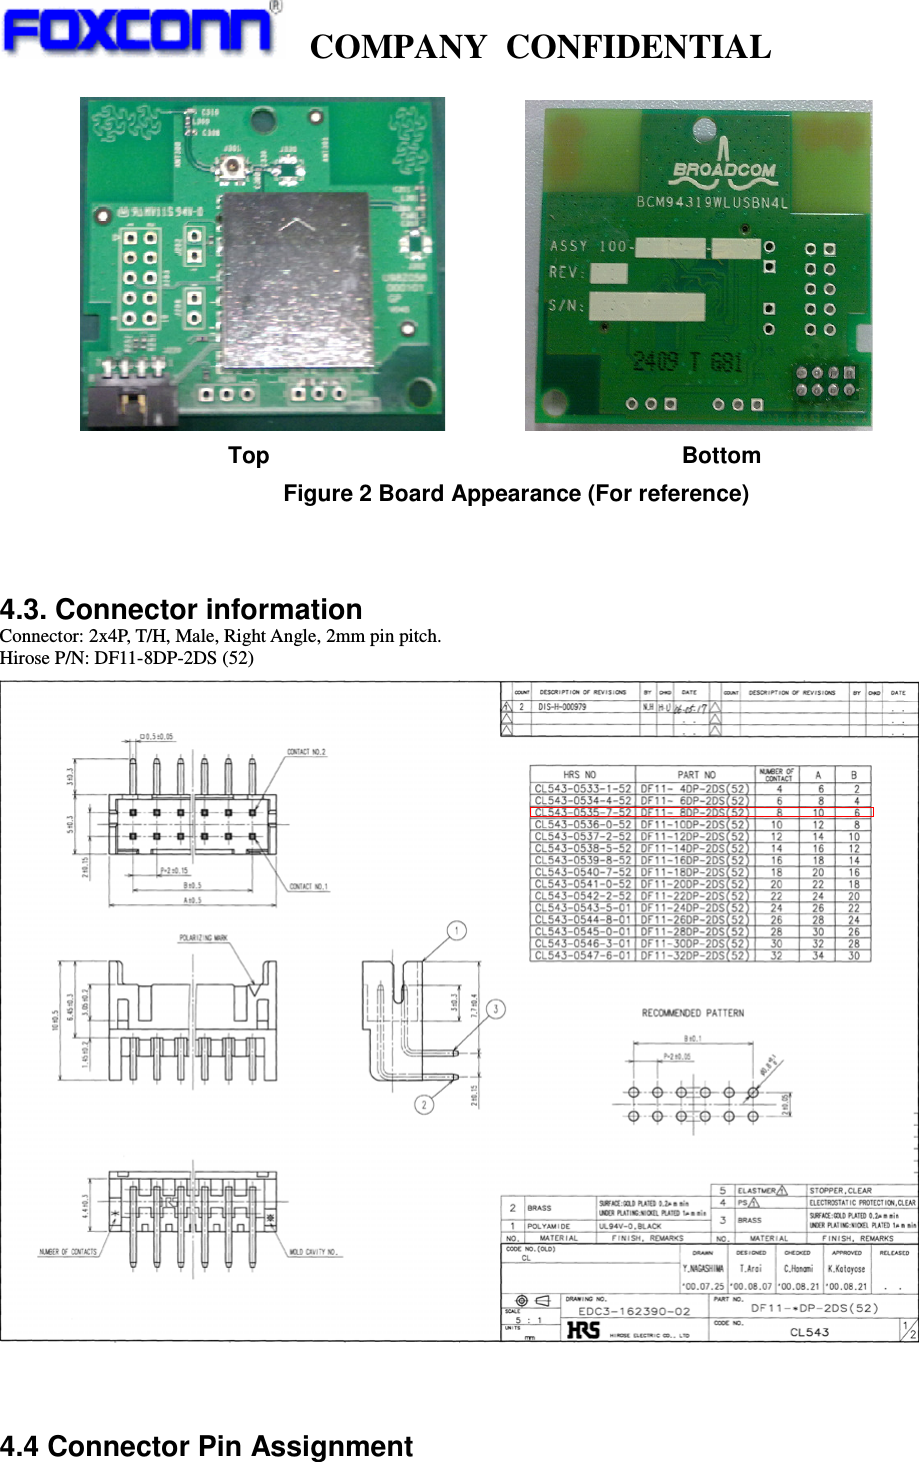   COMPANY CONFIDENTIAL                                   Top                                    Bottom   Figure 2 Board Appearance (For reference)   4.3. Connector information Connector: 2x4P, T/H, Male, Right Angle, 2mm pin pitch. Hirose P/N: DF11-8DP-2DS (52)      4.4 Connector Pin Assignment 